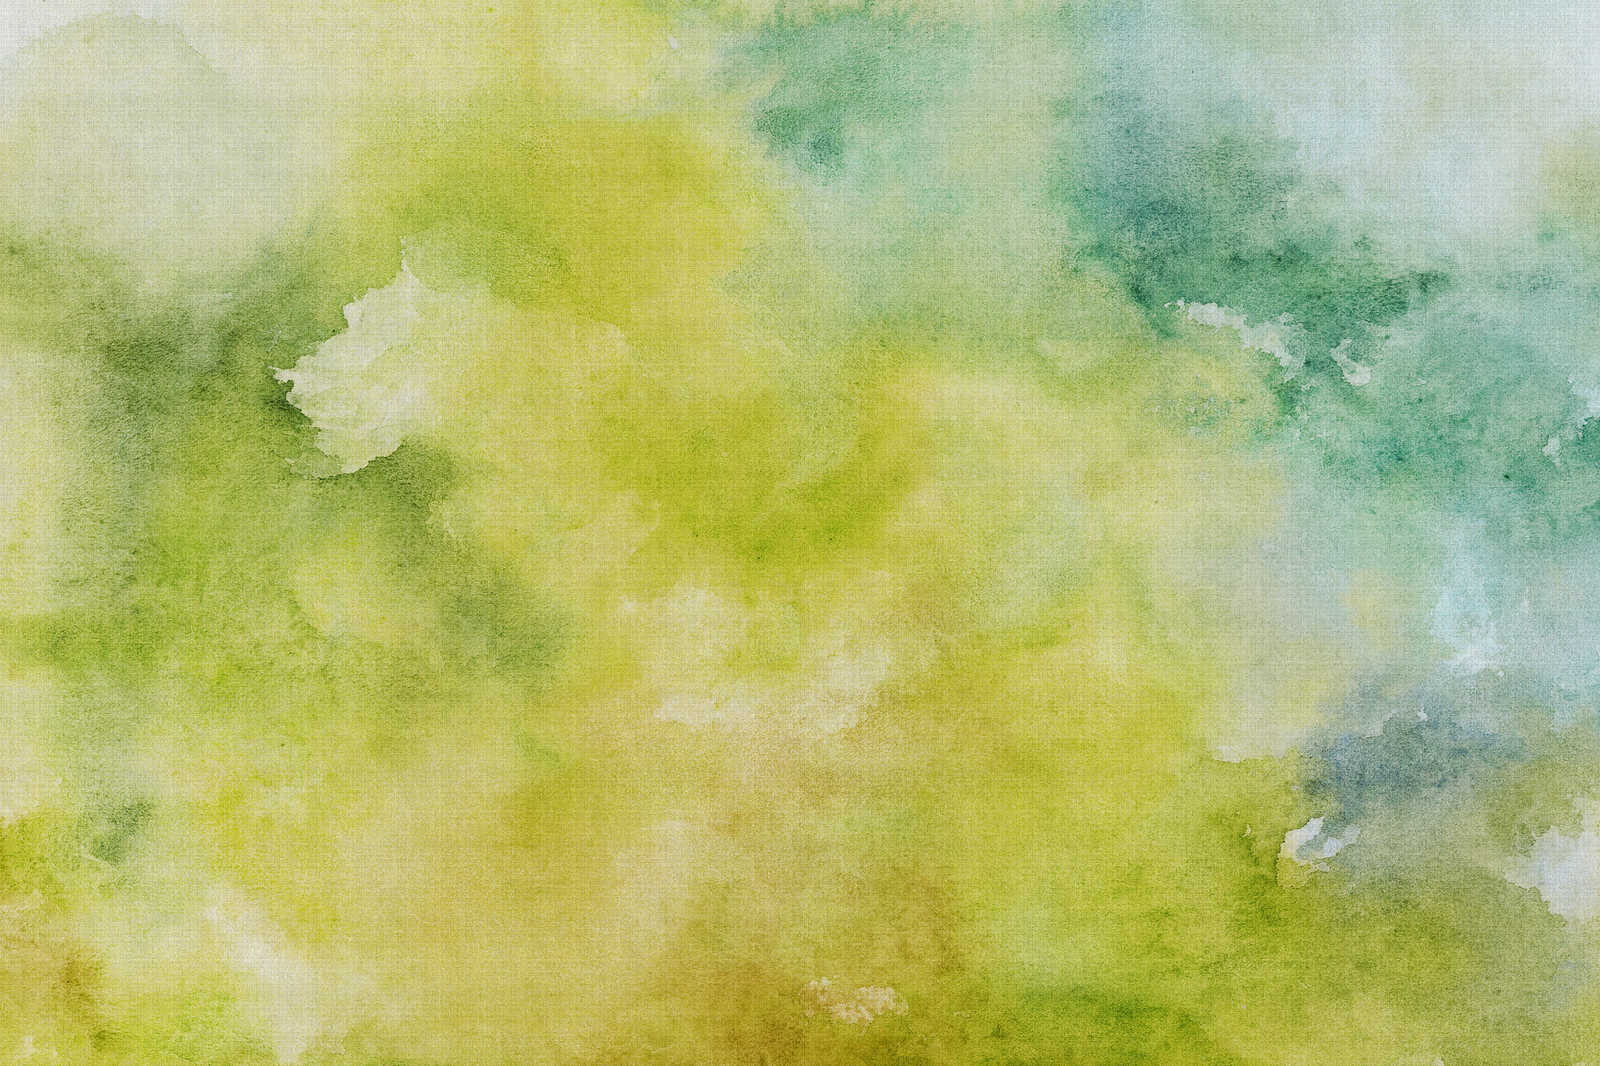             Watercolours 3 - Green watercolour motif as canvas picture in natural linen look - 0.90 m x 0.60 m
        